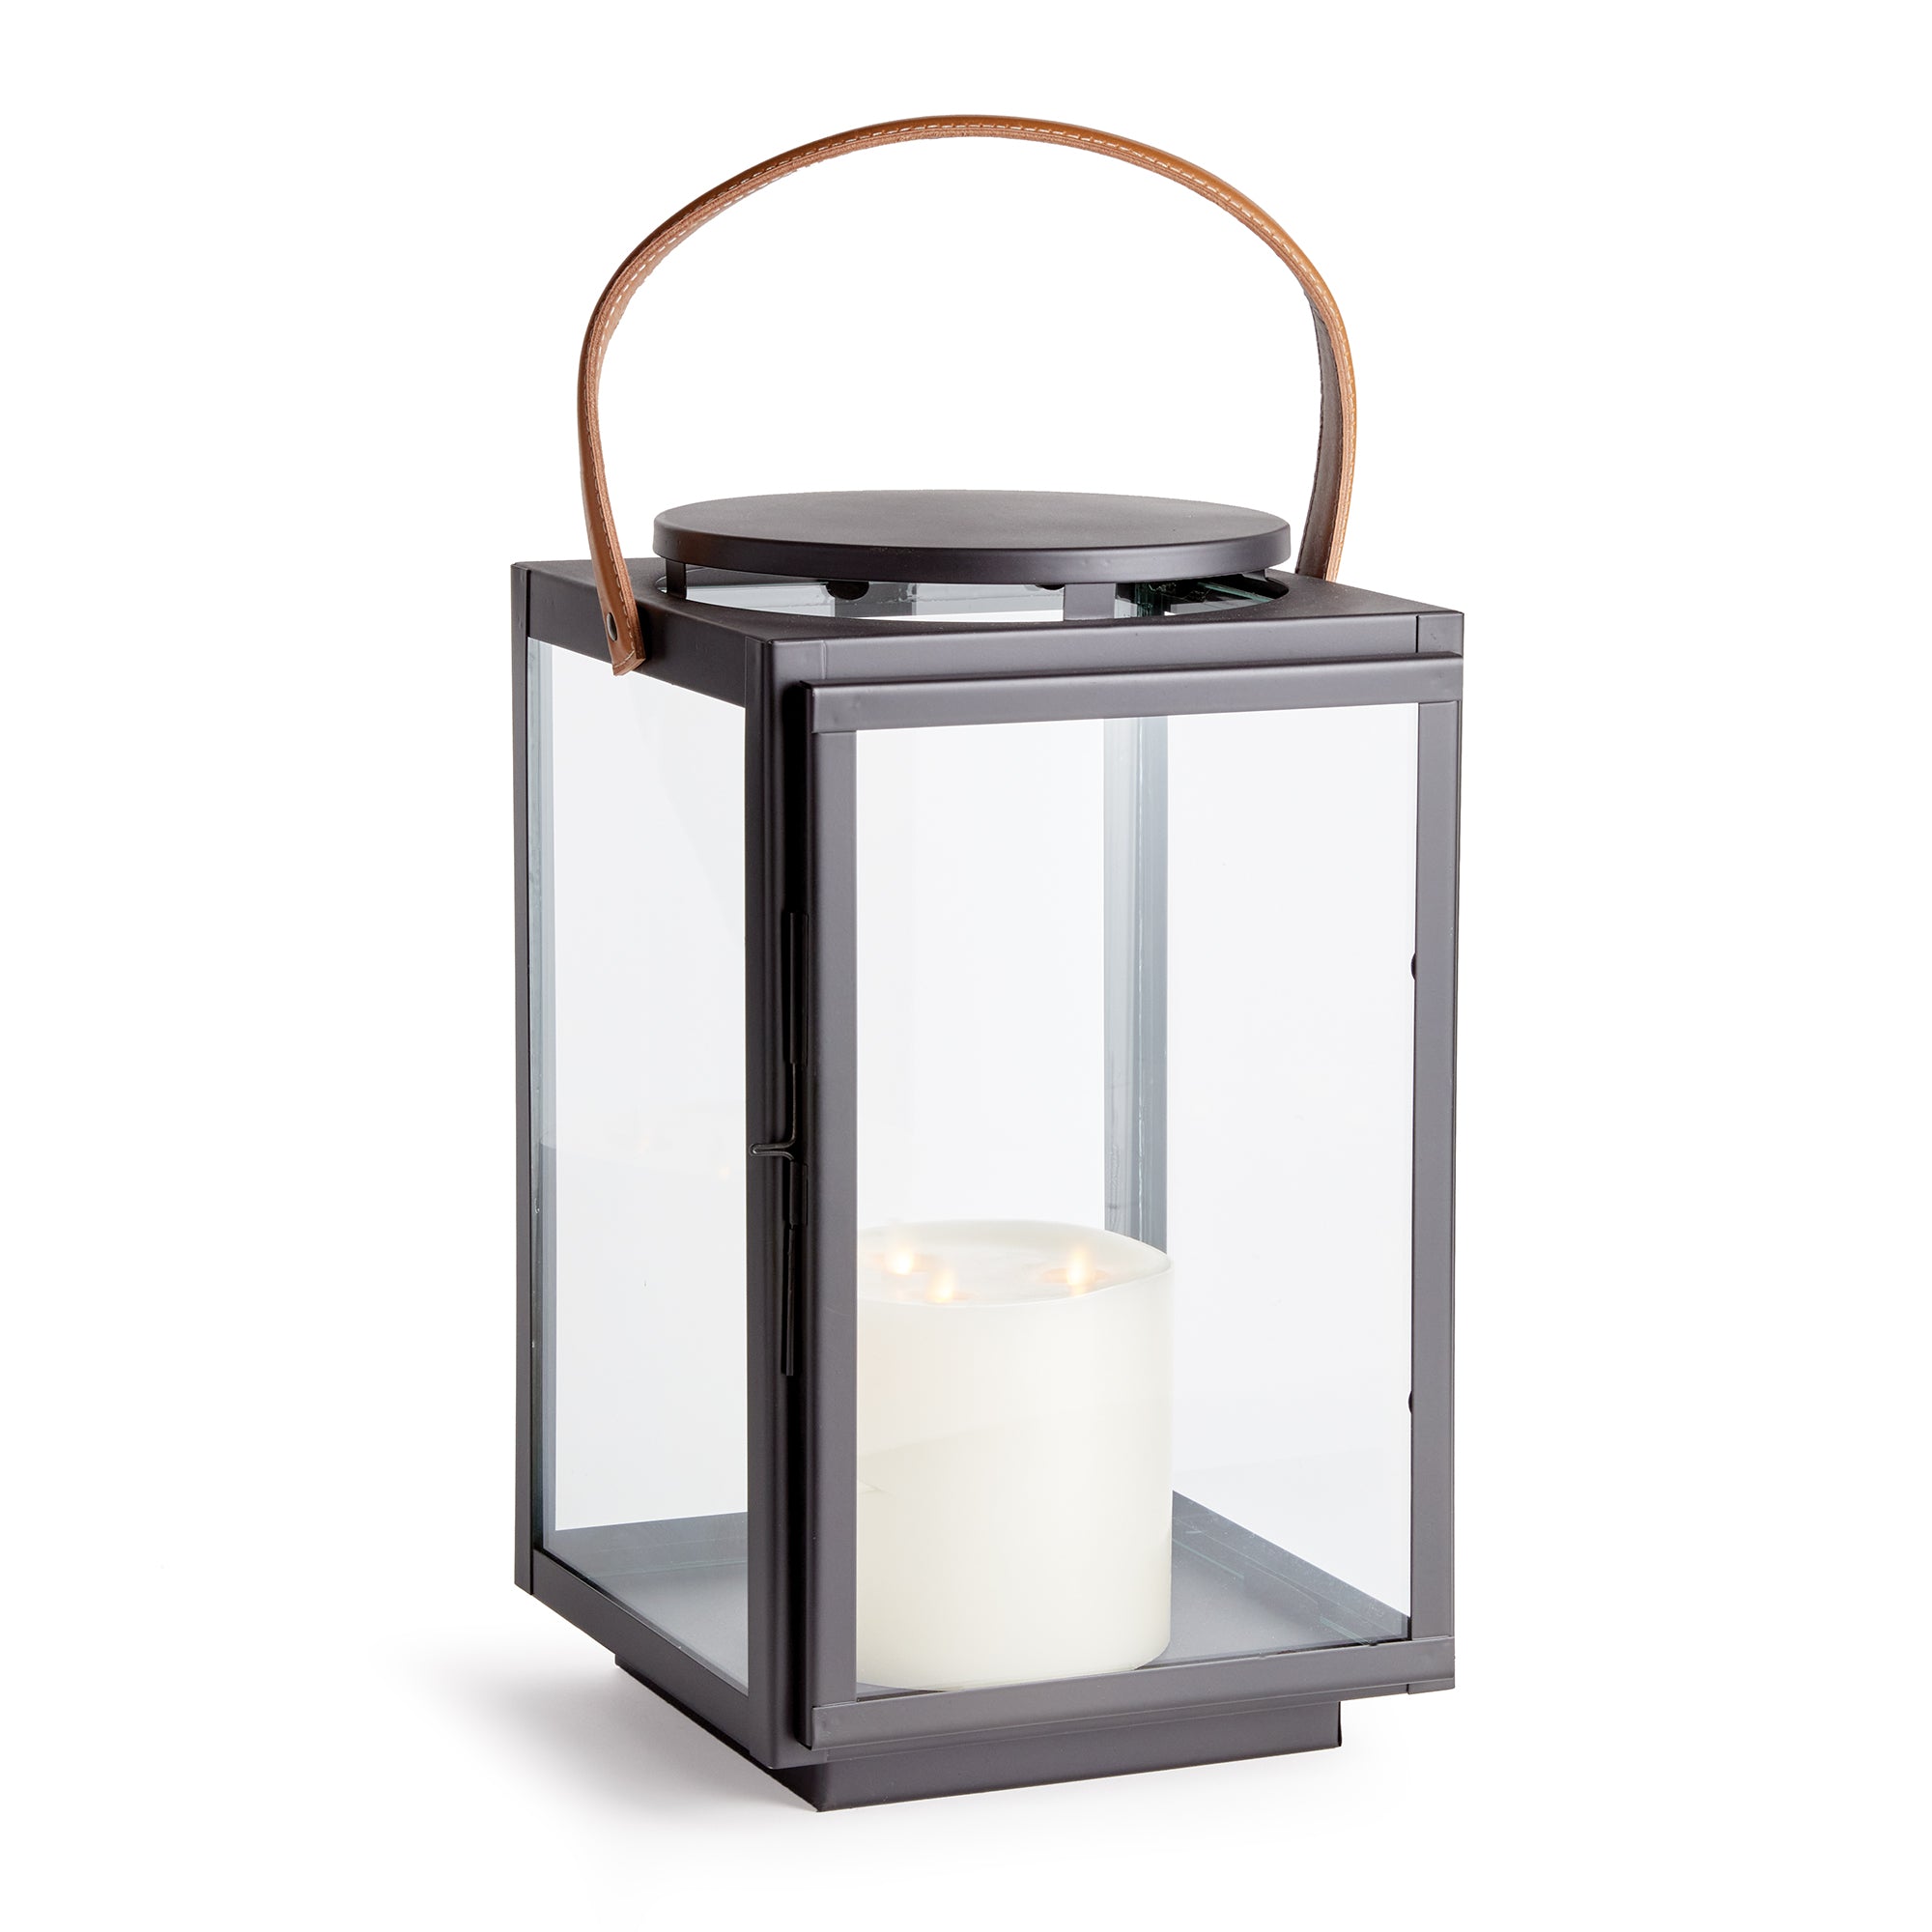 Featuring a real leather handle with tailored stitching, this well-scaled lantern is a mix of traditional and modern aesthetics. A beautiful accent for entryway, living room or study. Amethyst Home provides interior design, new construction, custom furniture, and area rugs in the Kansas City metro area.